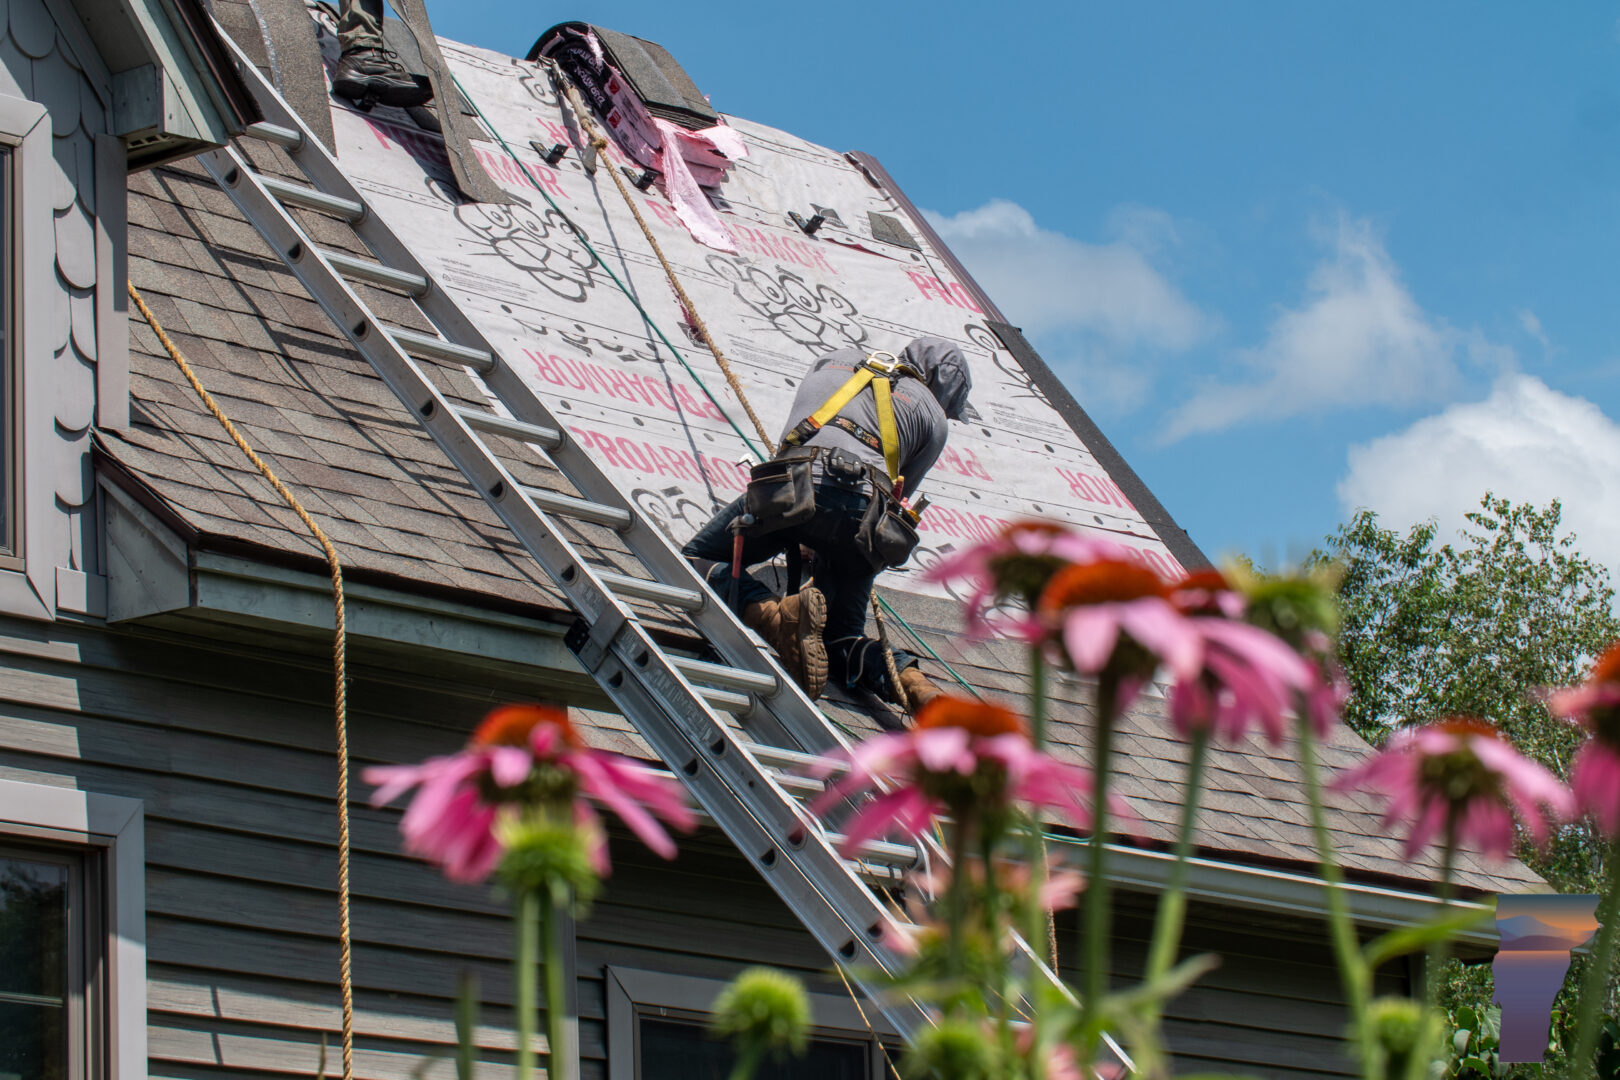 Roofer working on a roof next to a ladder